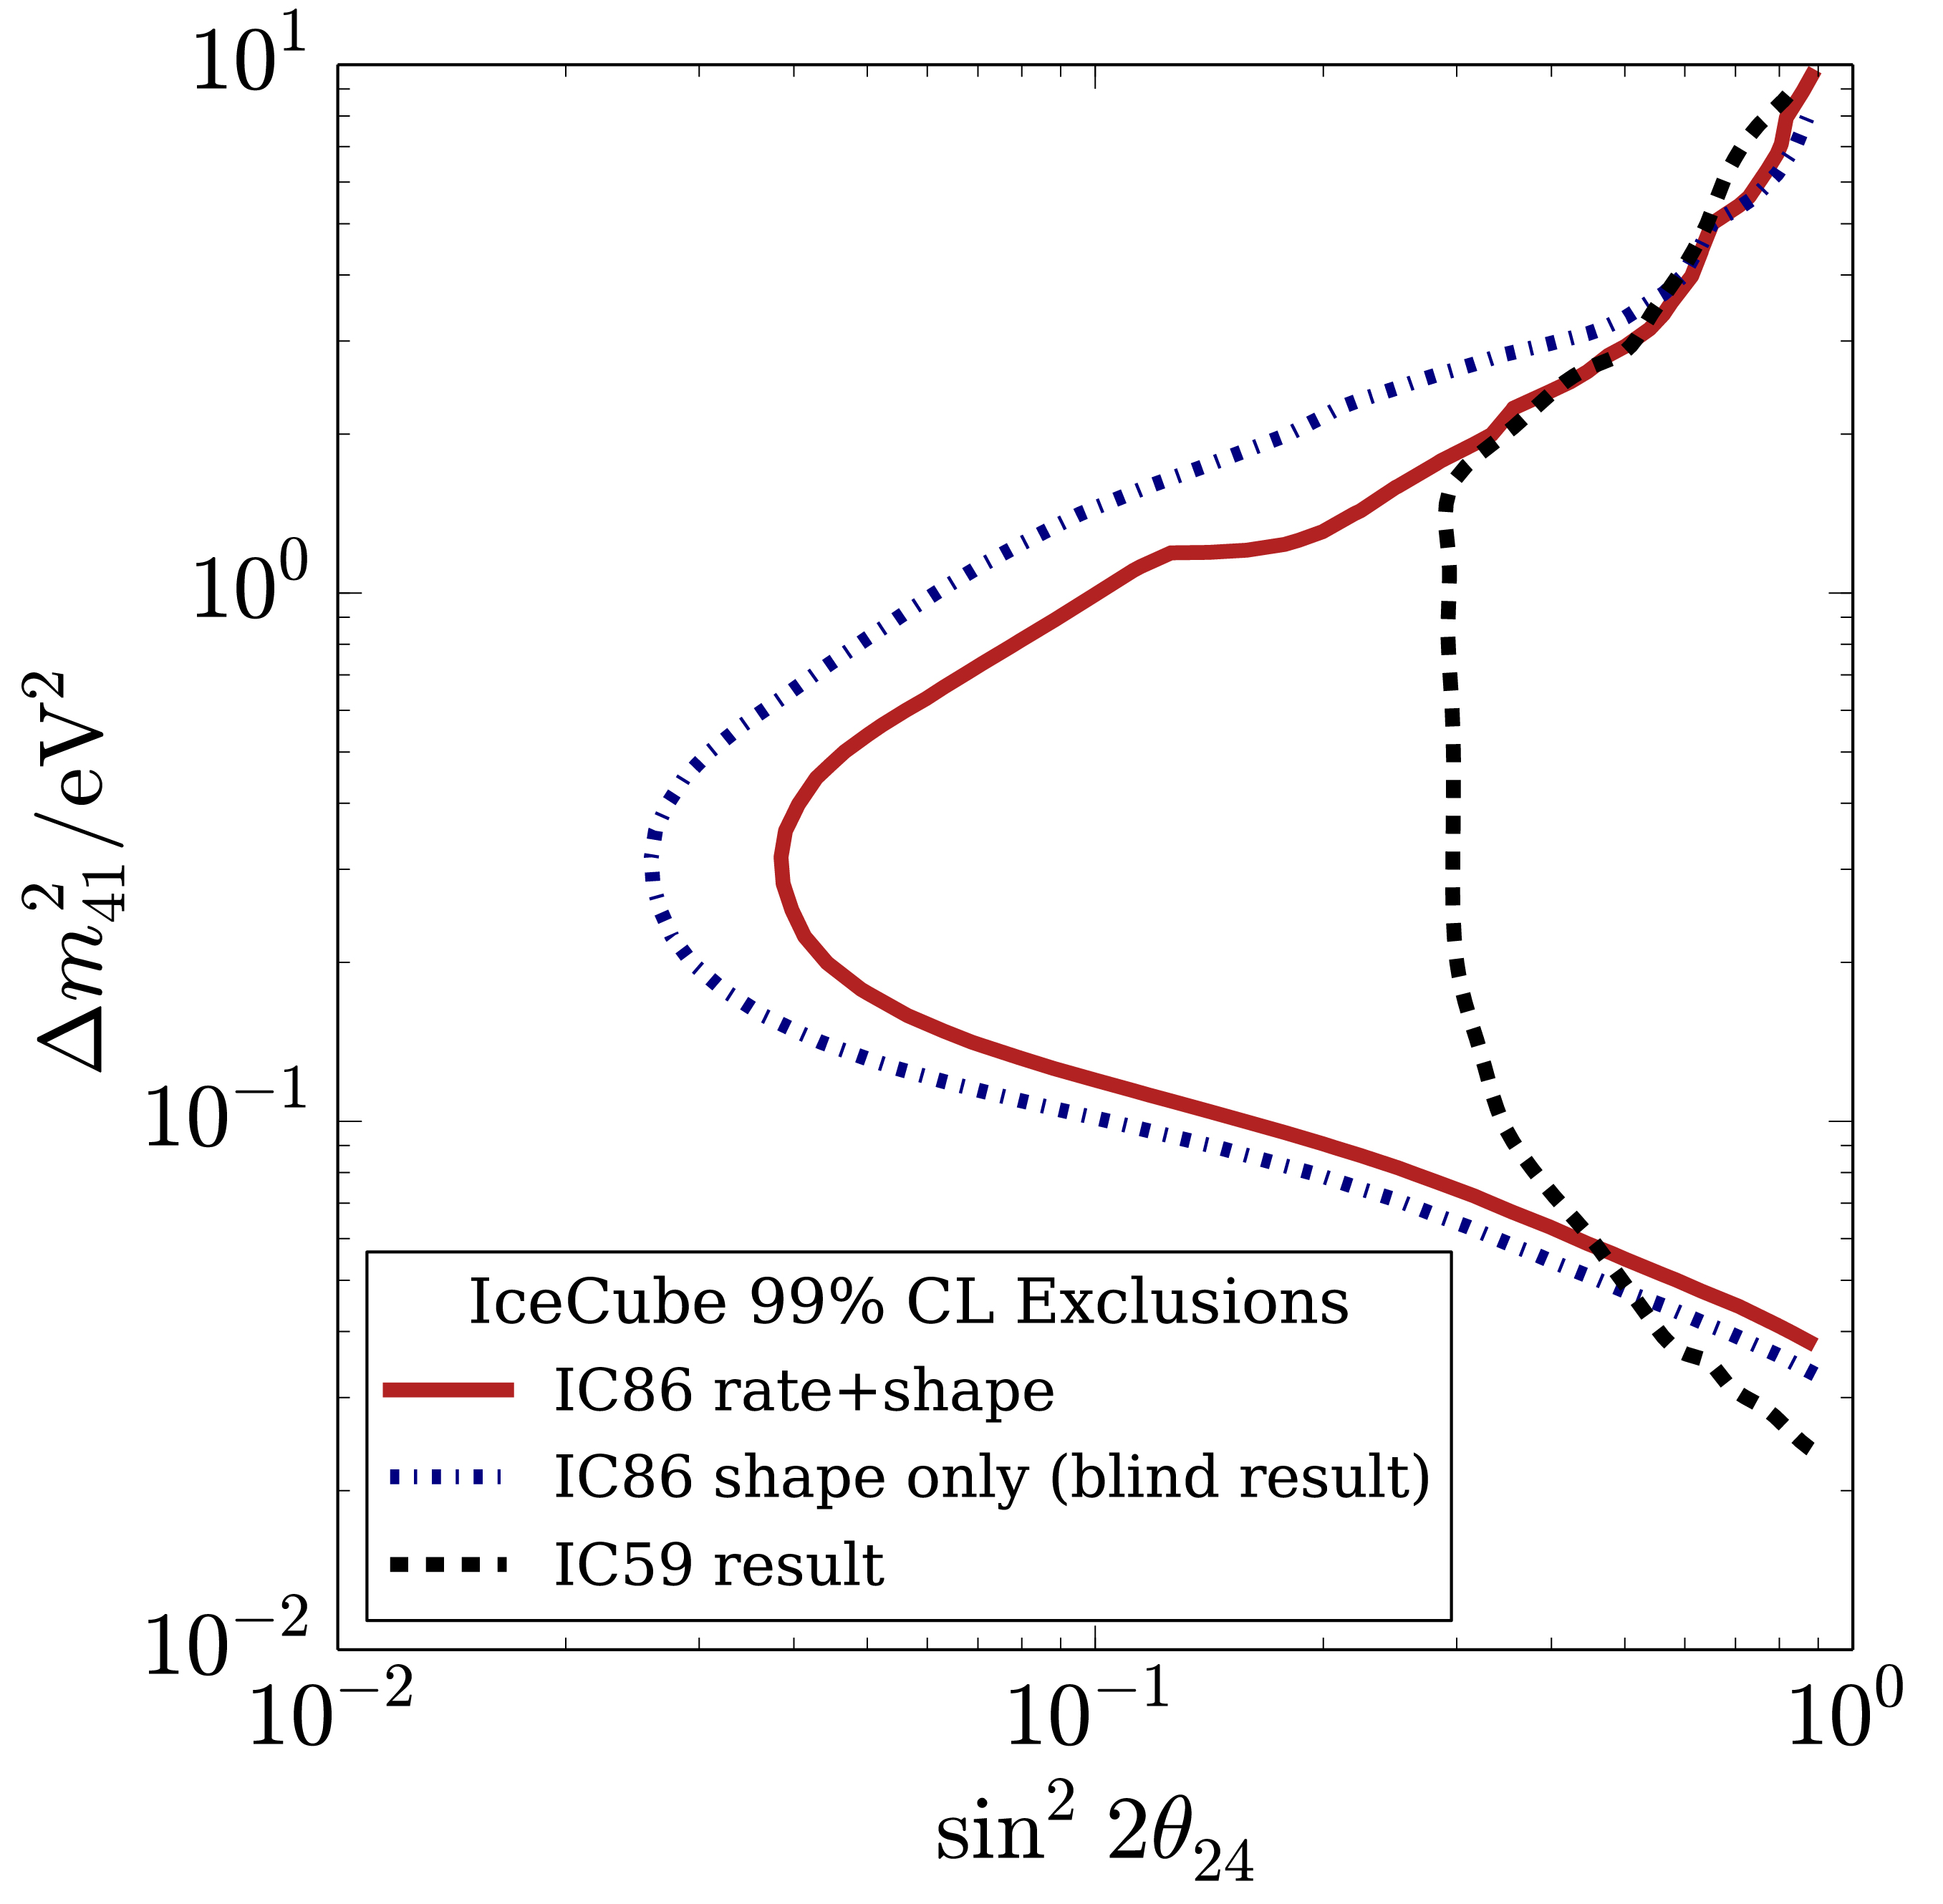 Exclusion limits for an eV-mass sterile neutrino